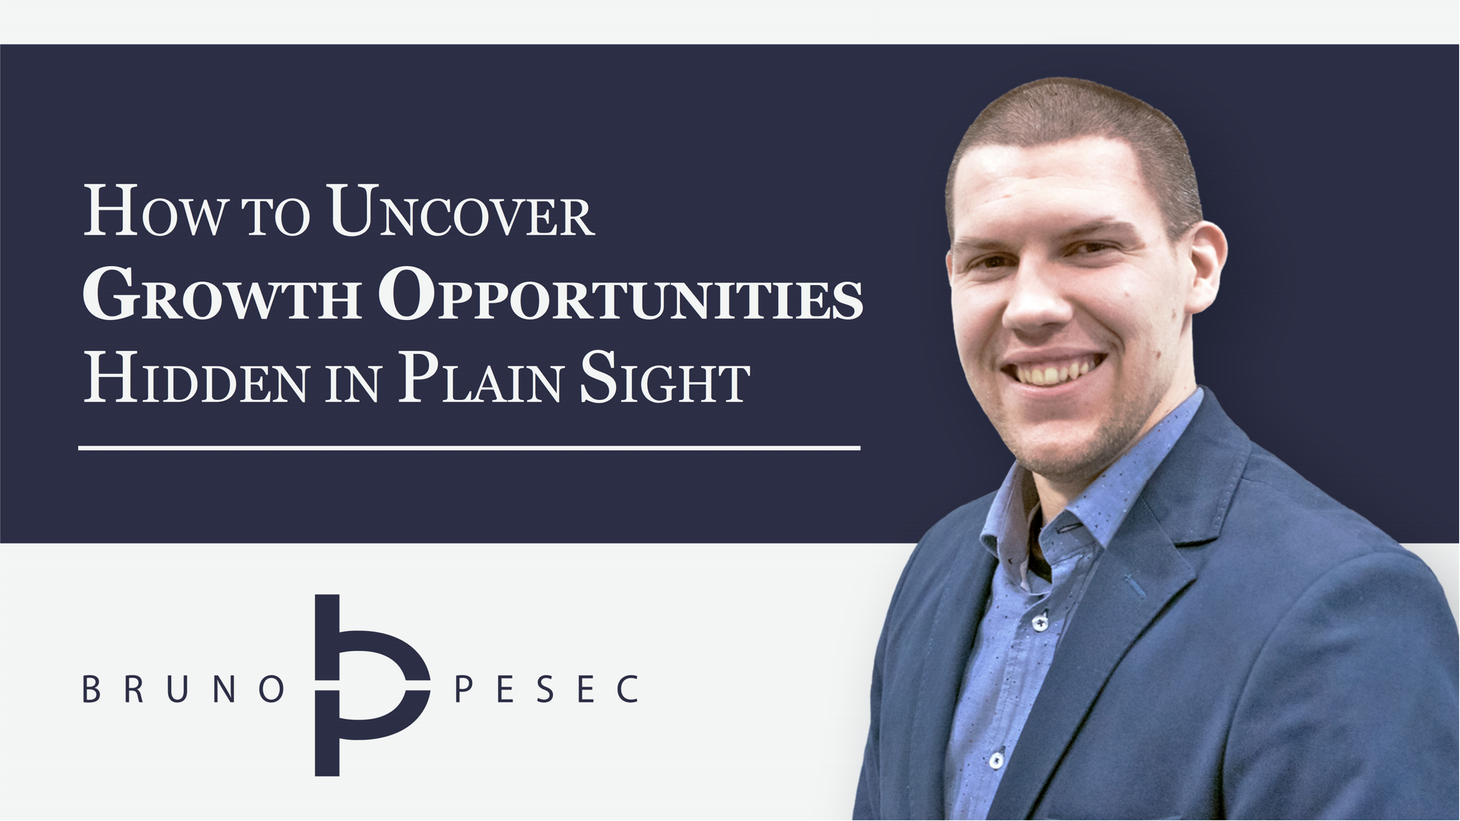 How to uncover growth opportunities hidden in plain sight